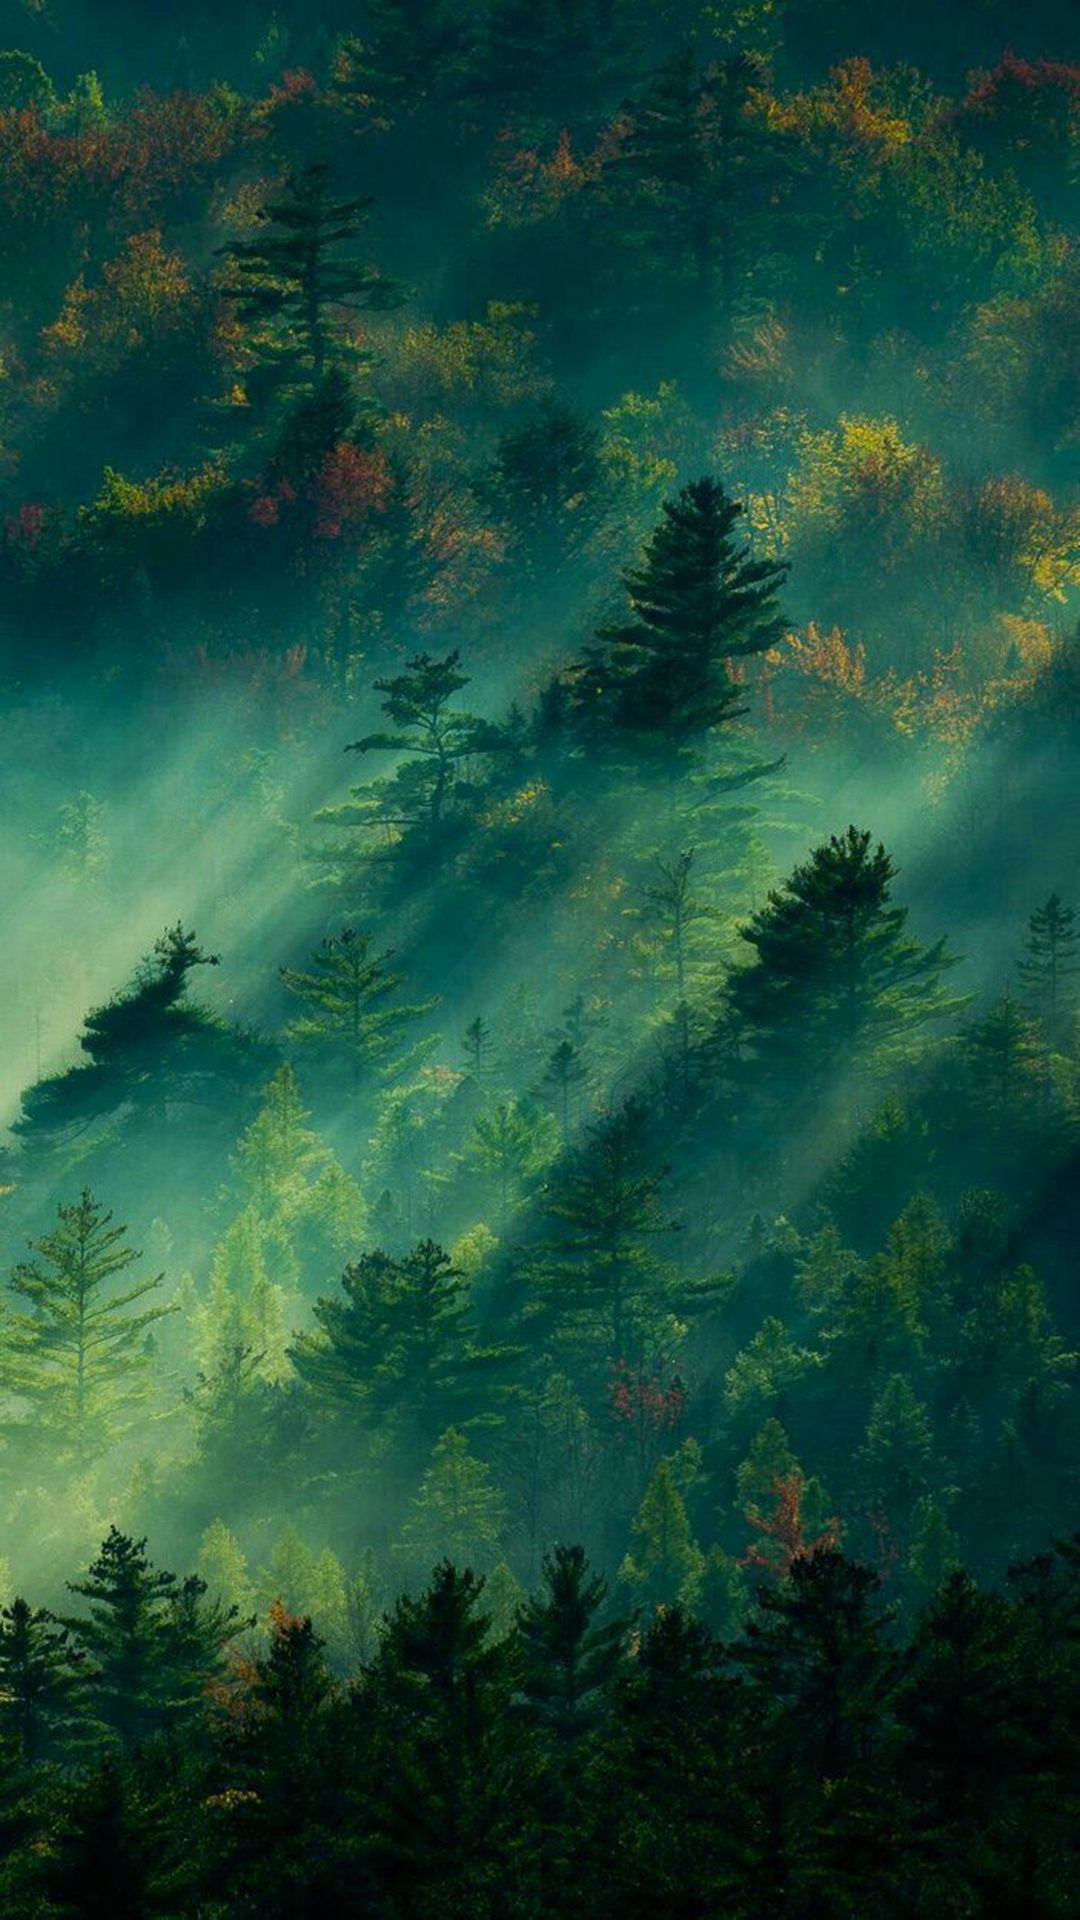 A misty forest with trees and mountains - Nature